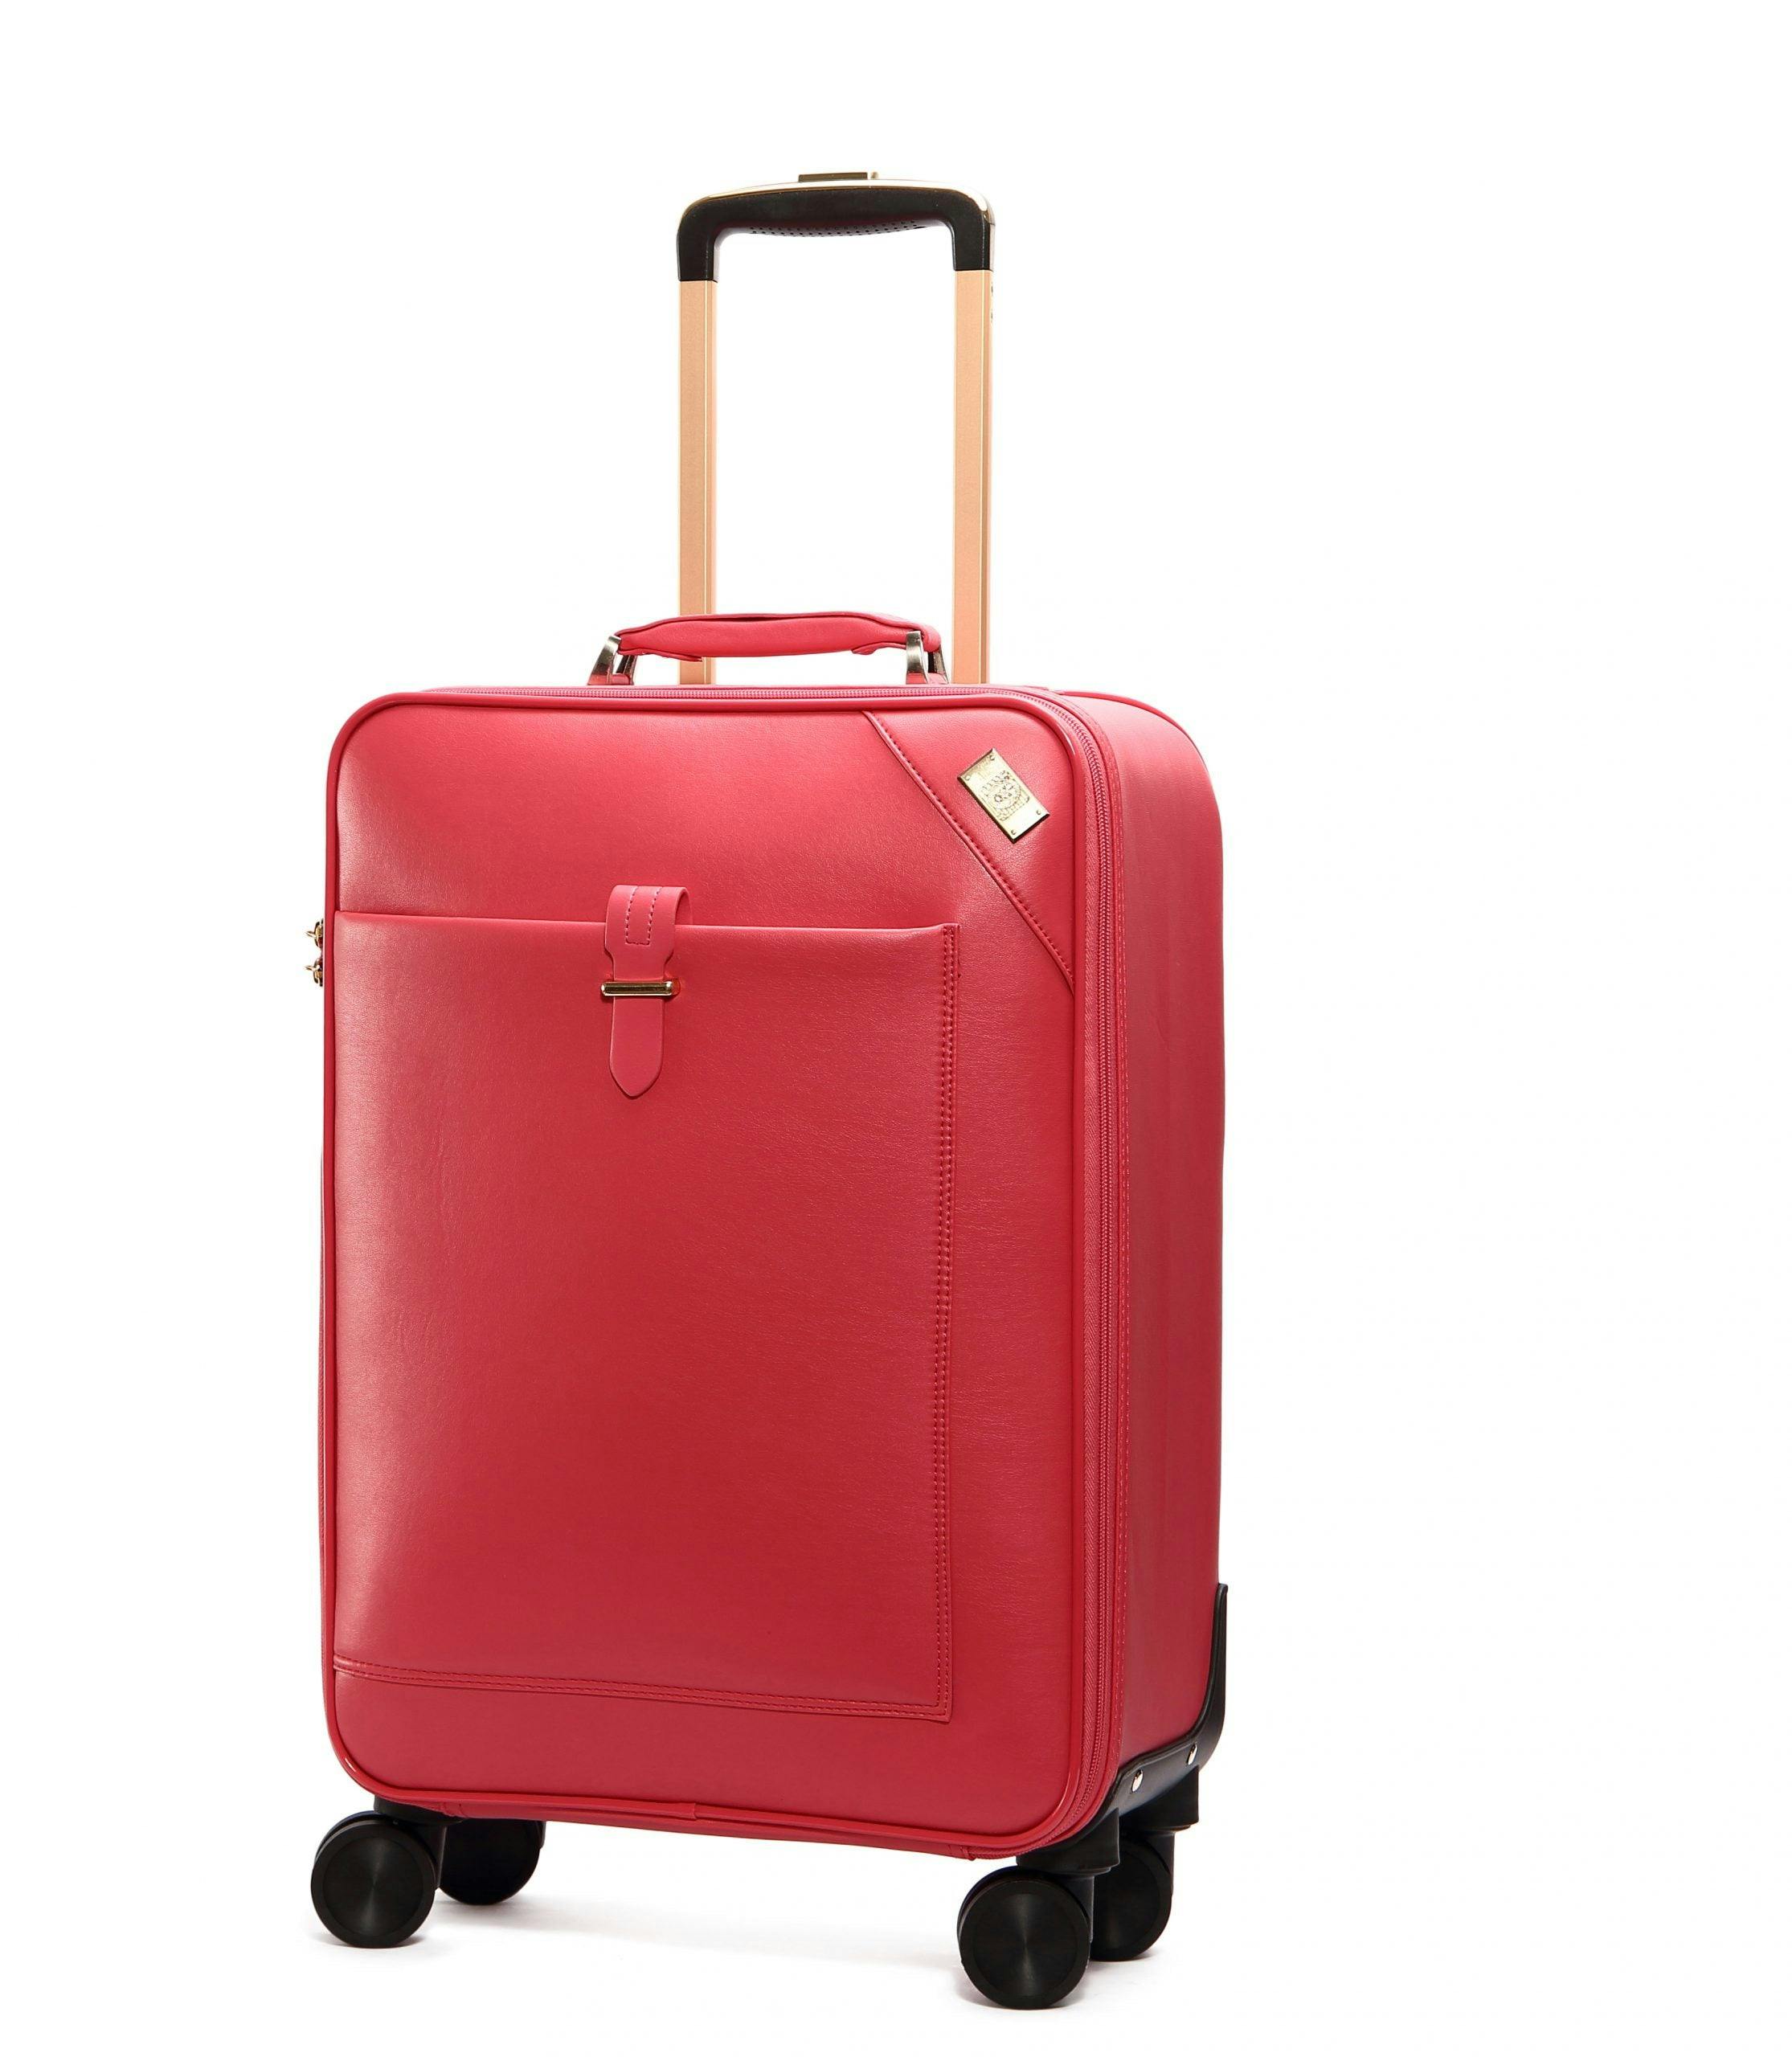 SEMMS PINK LUXURIOUS LEATHER LUGGAGE